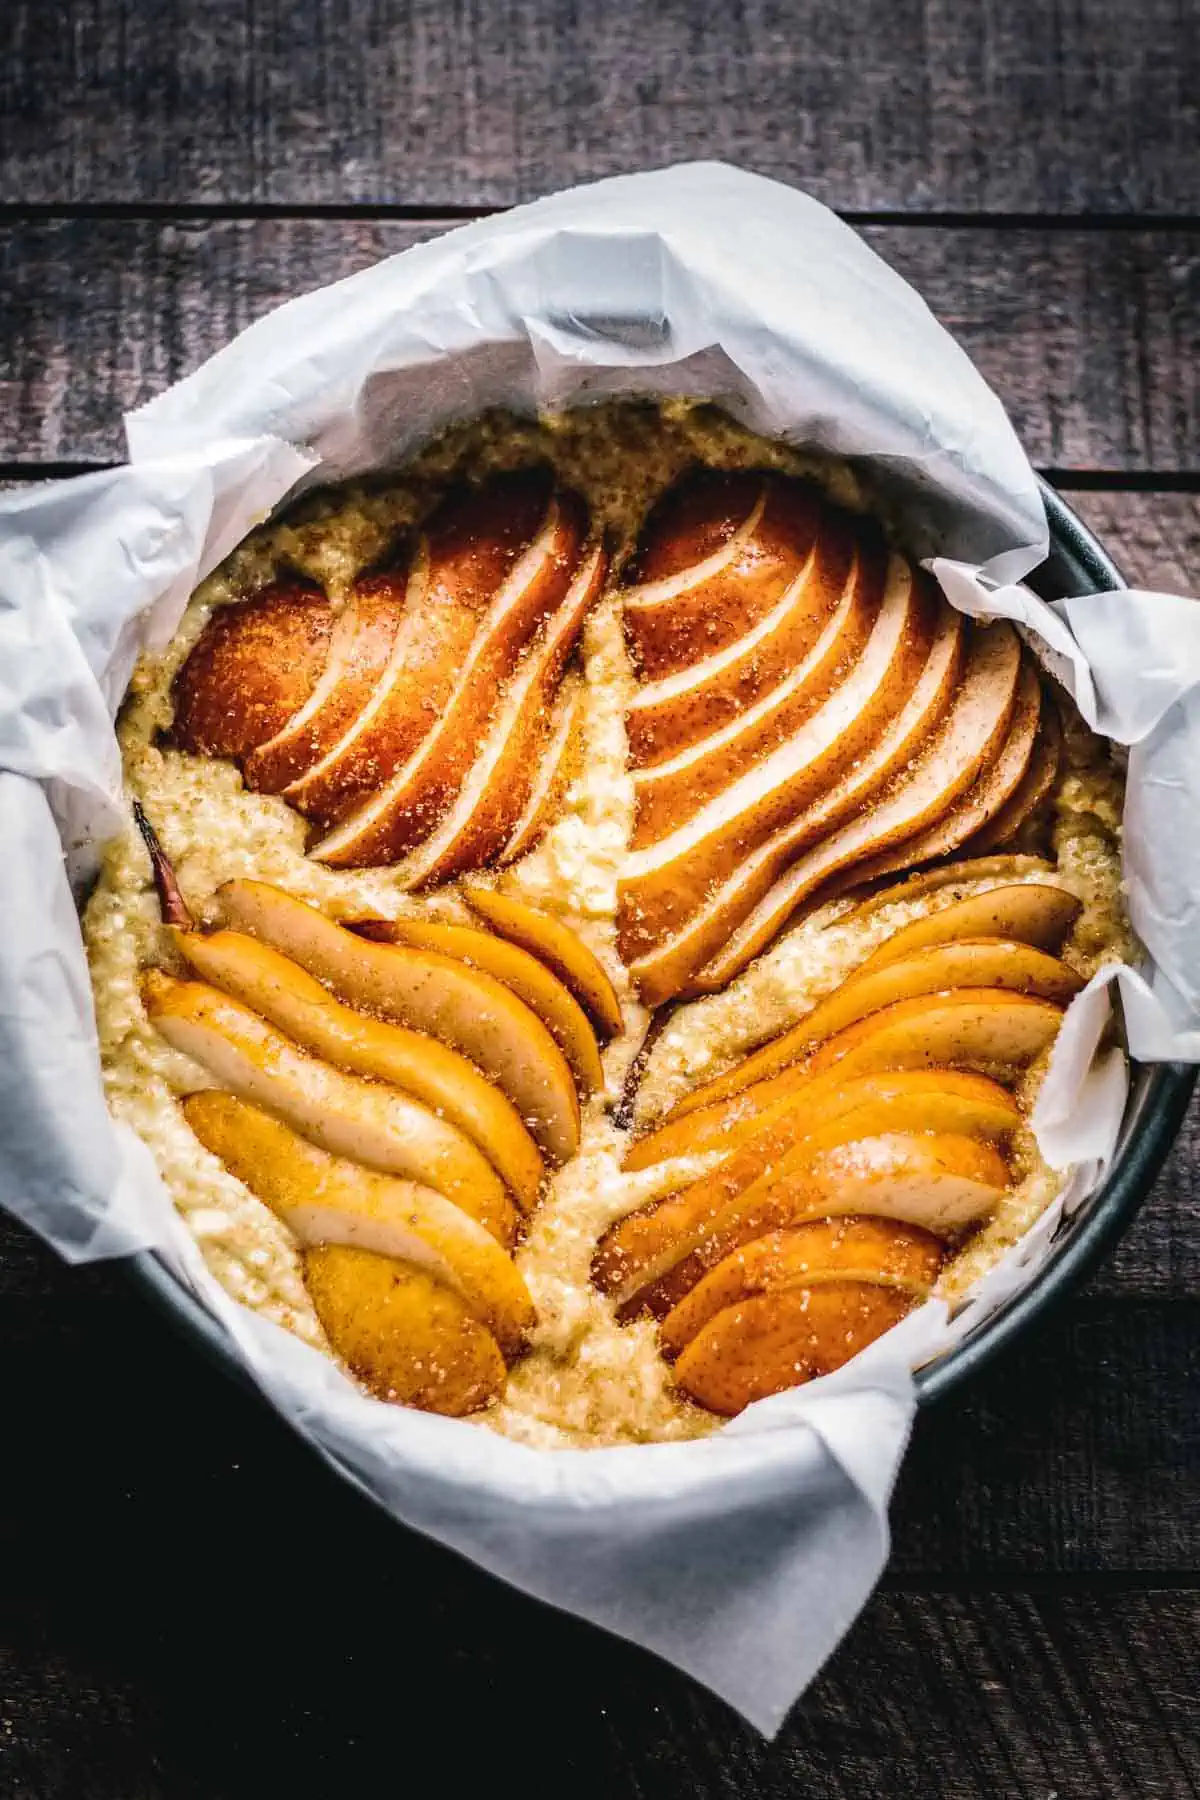 Sliced pears set into ricotta cake batter in a round pan.